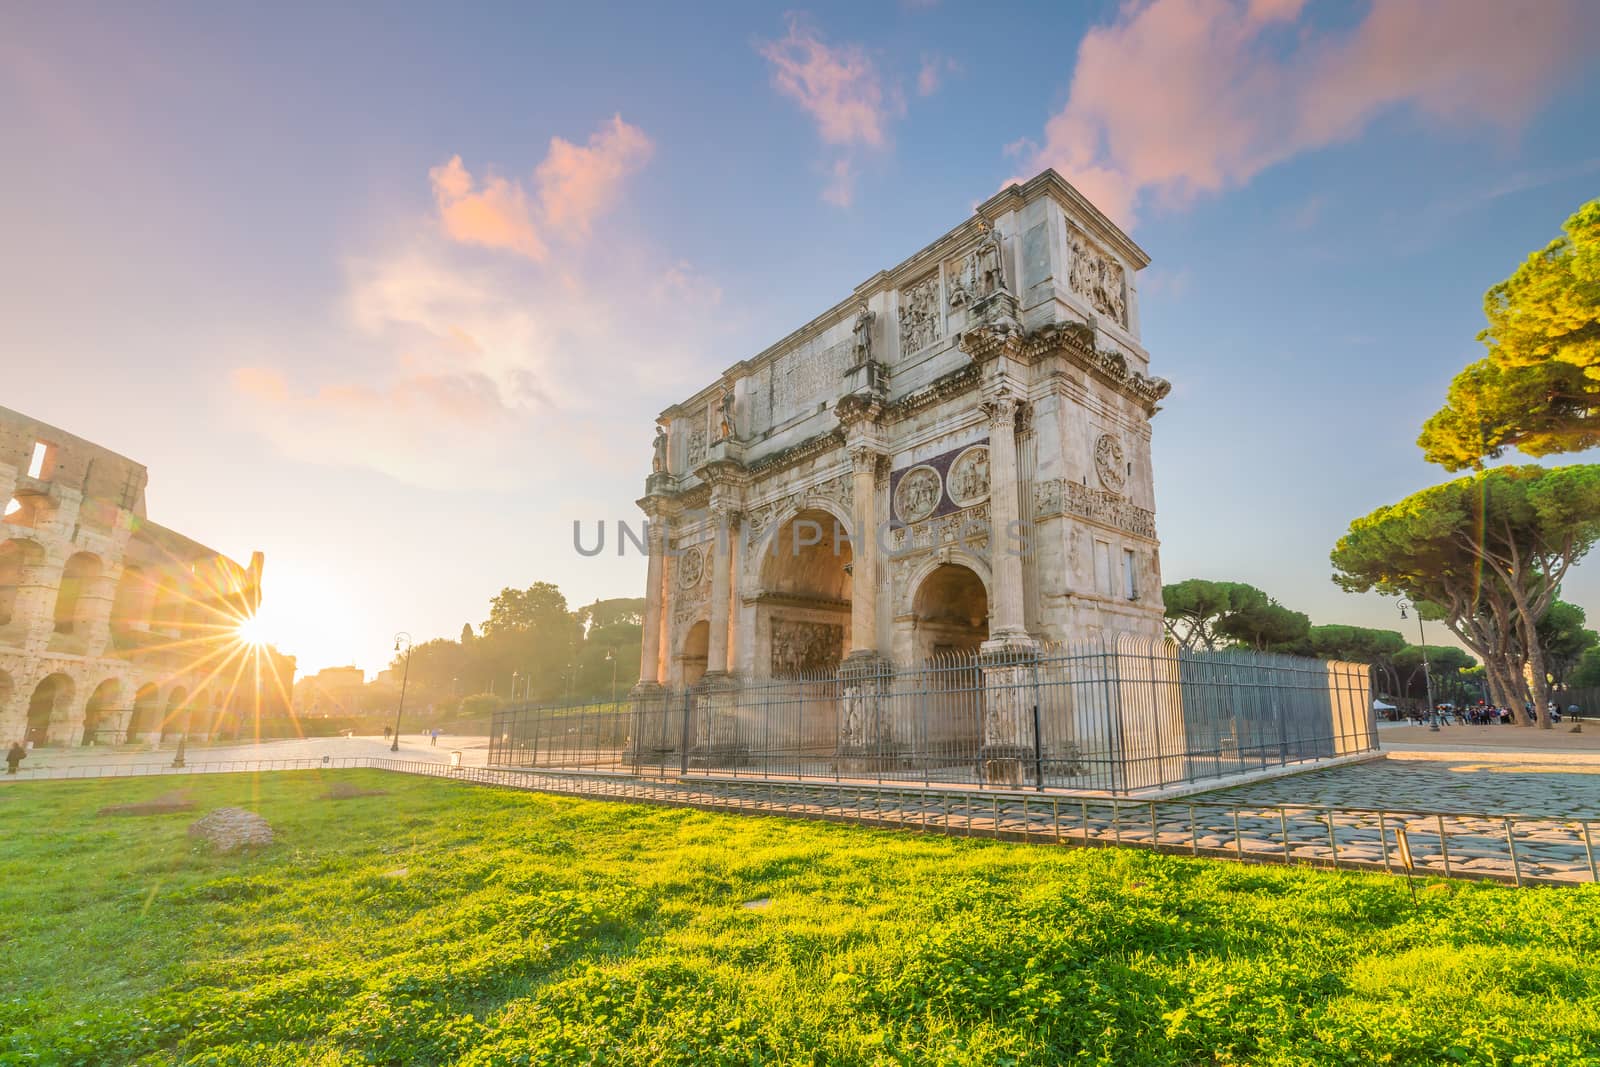 View of the Arch of Constantine in Rome, Italy at sunset